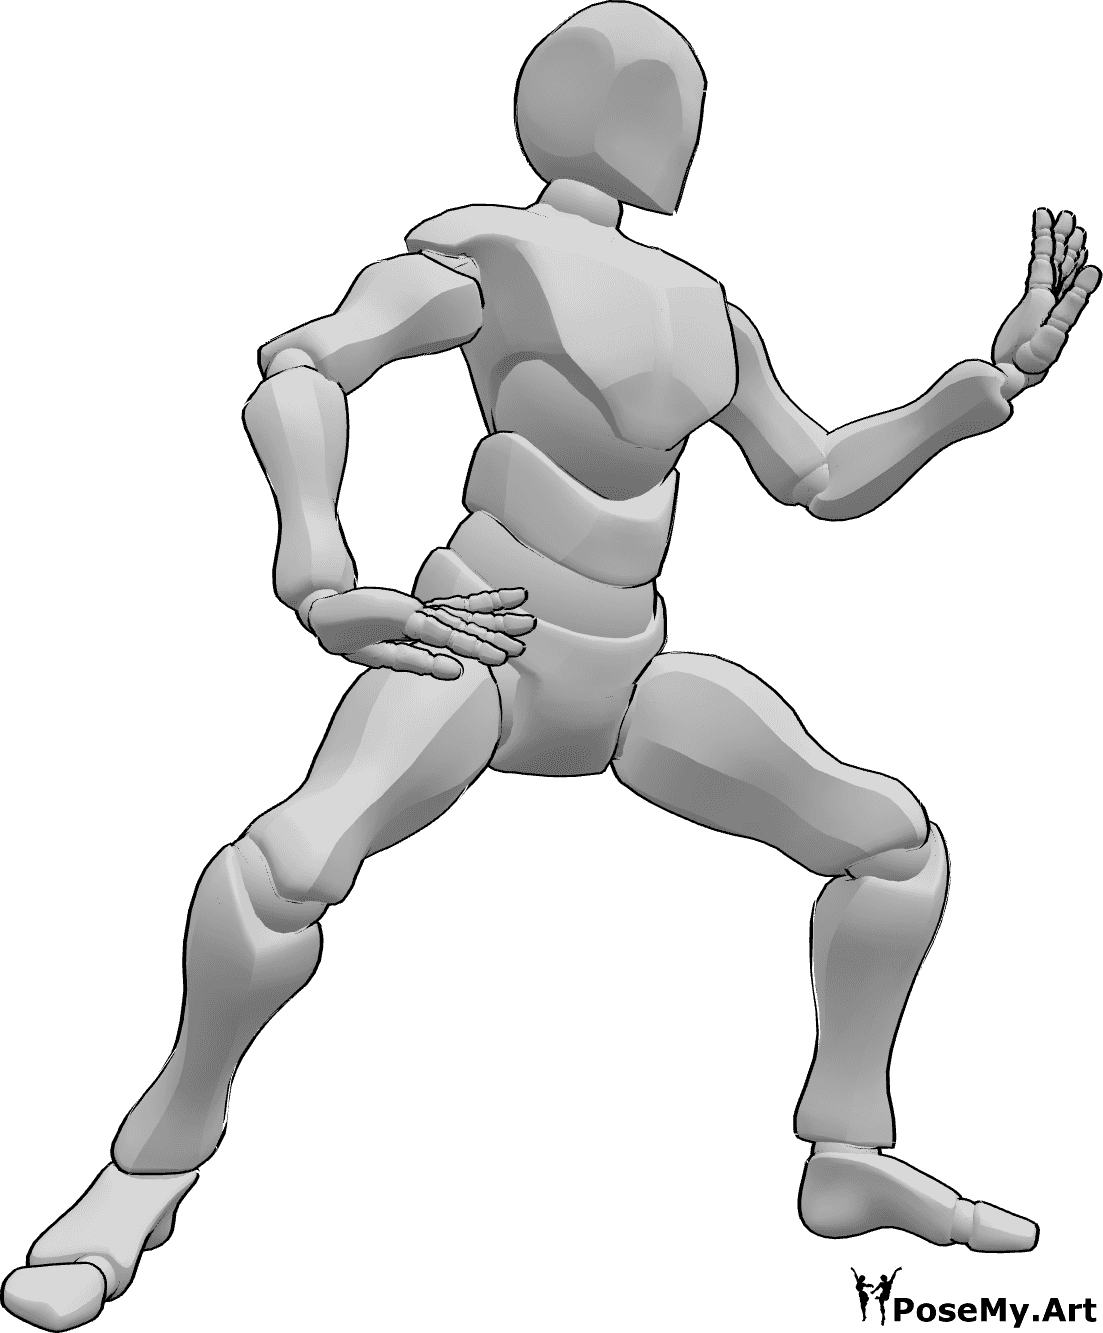 Pose Reference- Energy flowing tai chi pose - Male is standing with knees bent, looking left, tai chi pose